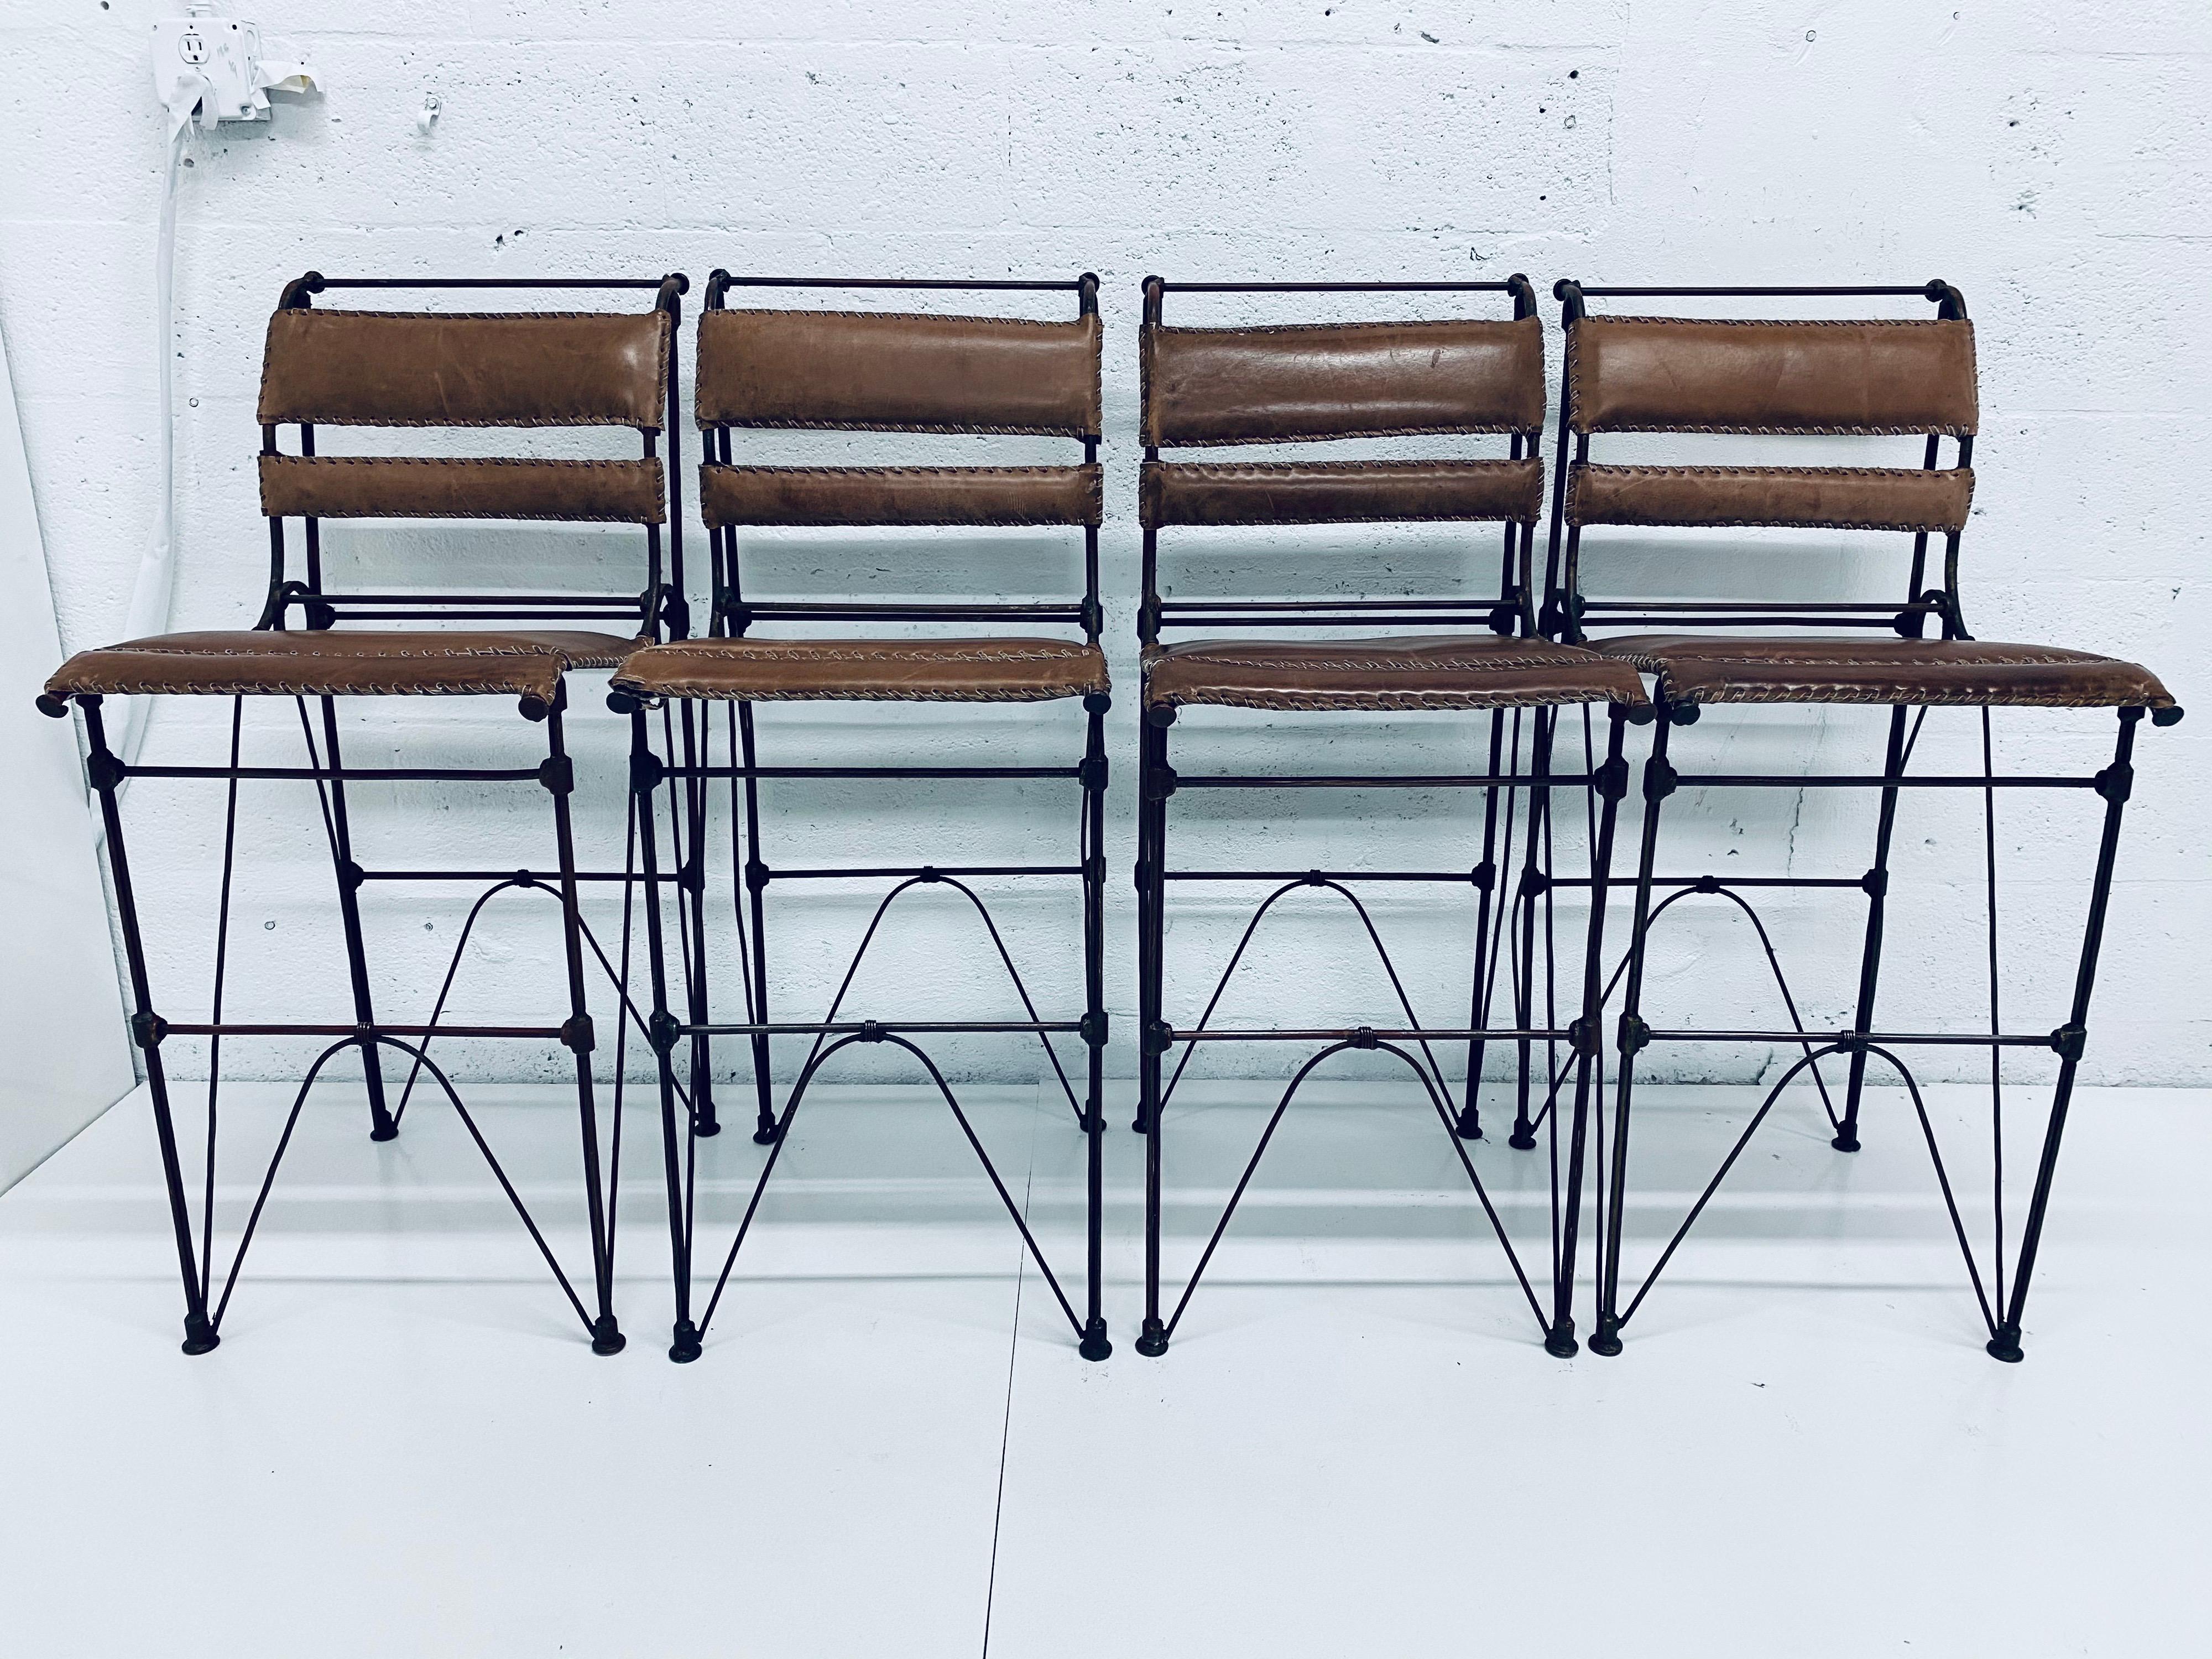 Set of four Ilana Goor attributed brown leather and iron rebar barstools / bar chairs, circa 1970s. See condition information.